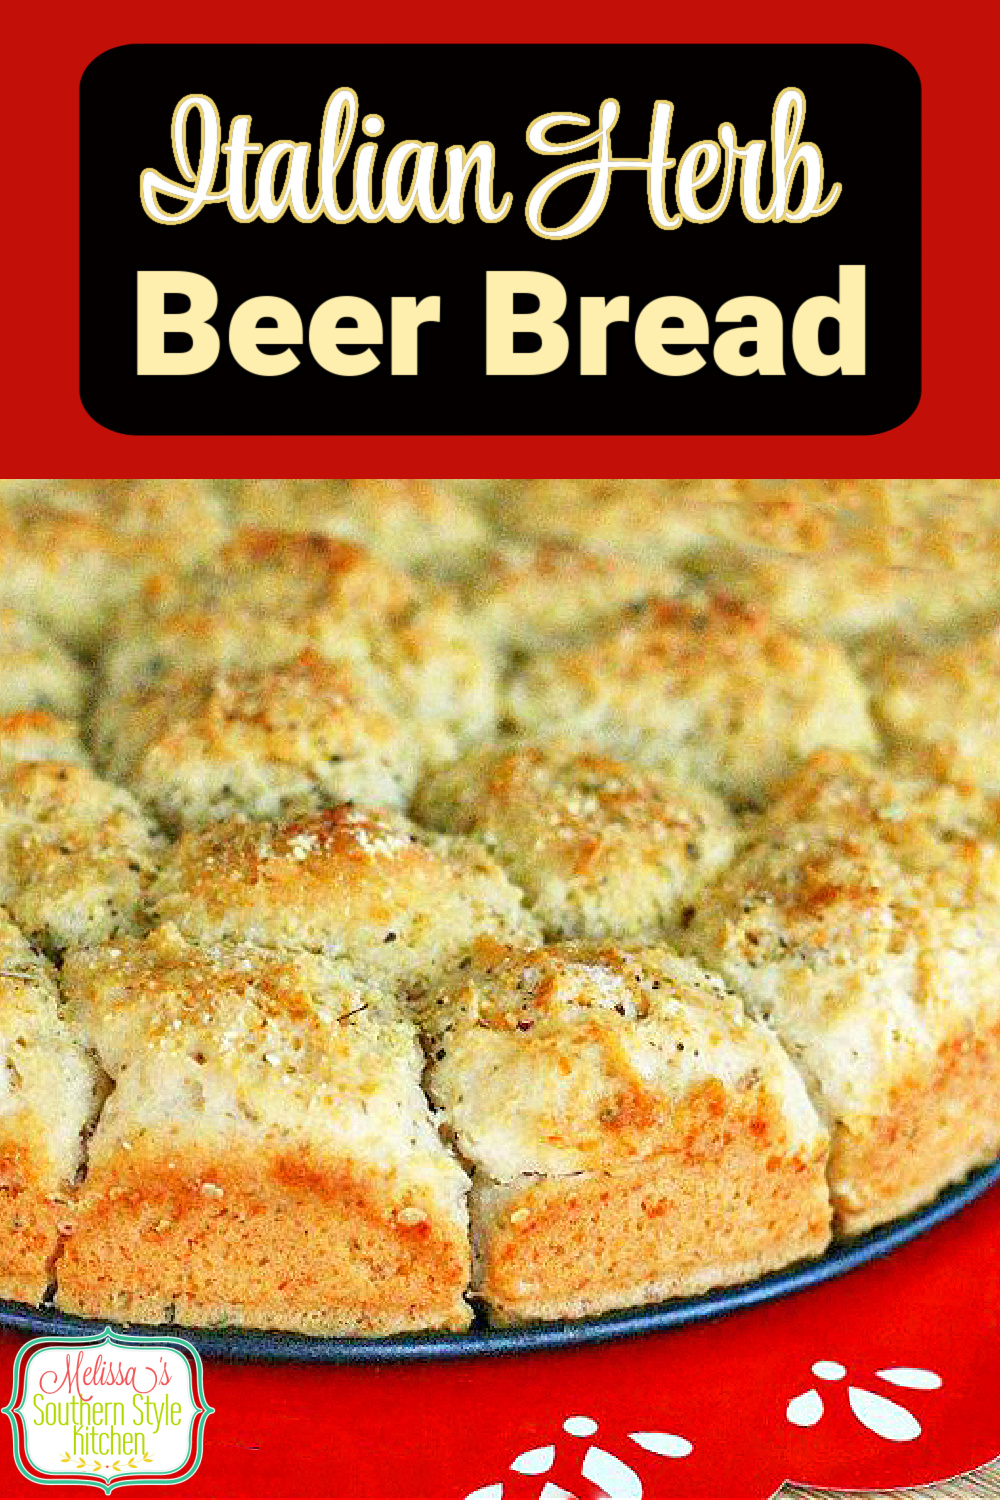 No yeast needed to make this pull apart Italian Herb Beer Bread #beerbread #pullapartbread #breadrecipes #beer #bread #Italianbreadrecipes #quickbreads #southernfood #southernrecipes